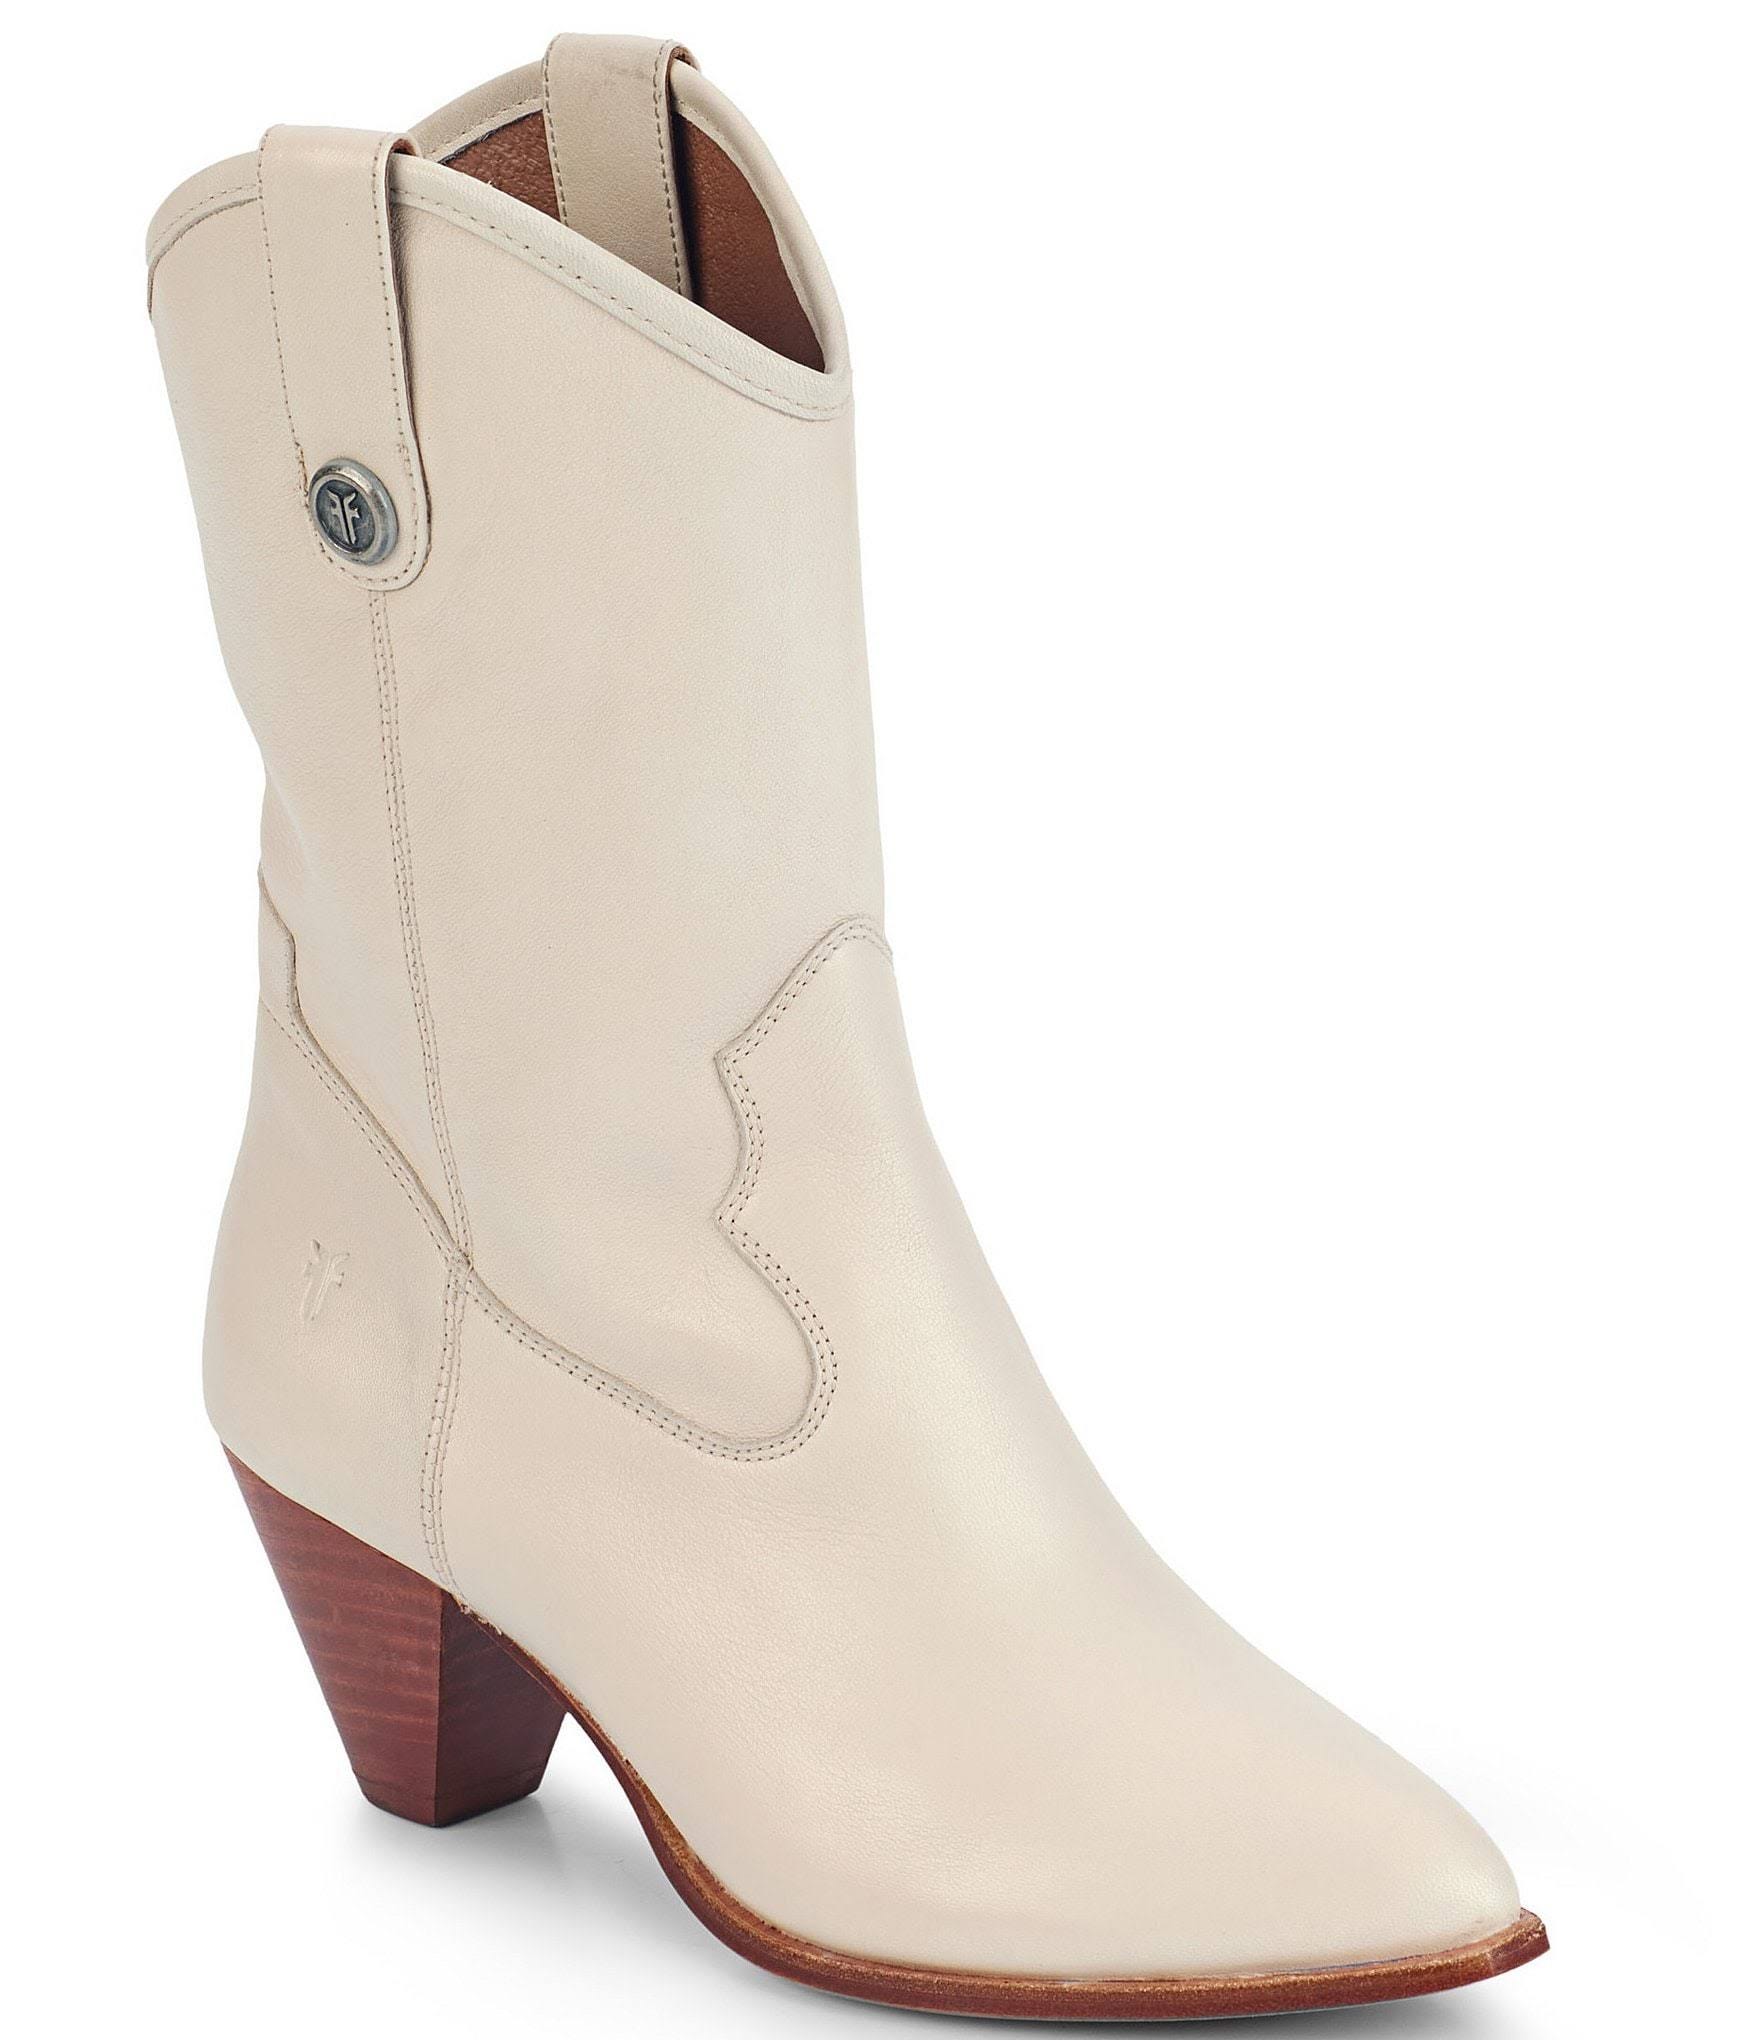 Stylish White Cowgirl Boots - Frye June Western Boots | Image